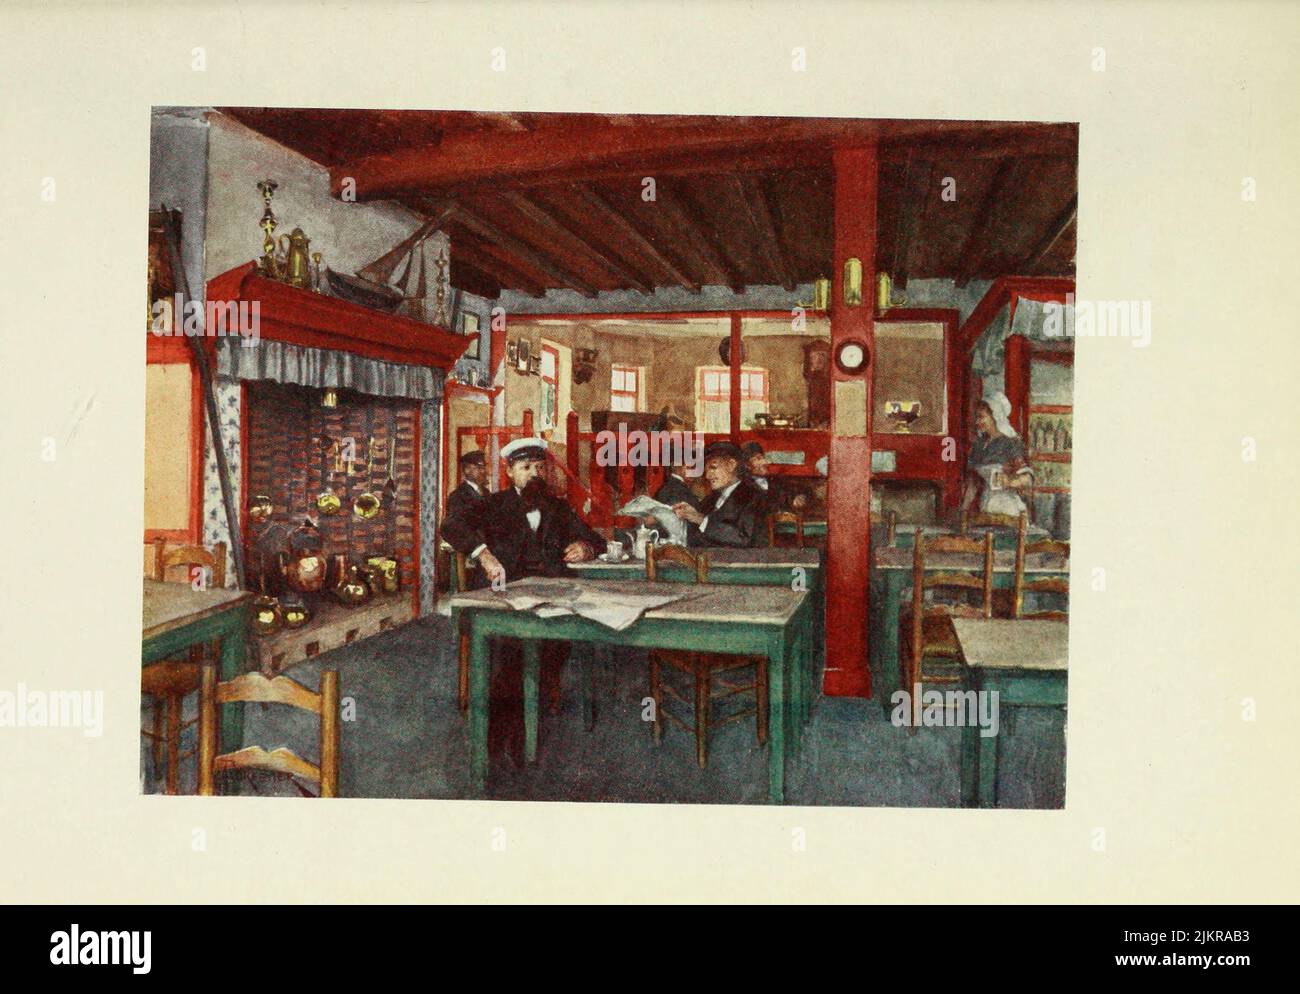 La Panne Interior of a Flemish Inn Painted by Amedee Forestier, from the book '  Bruges and West Flanders ' by George William Thomson Omond, Publication date 1906 Publisher London : A. & C. Black Sir Amédée Forestier (Paris 1854 – 18 November 1930 London) was an Anglo-French artist and illustrator who specialised in historical and prehistoric scenes, and landscapes. Stock Photo